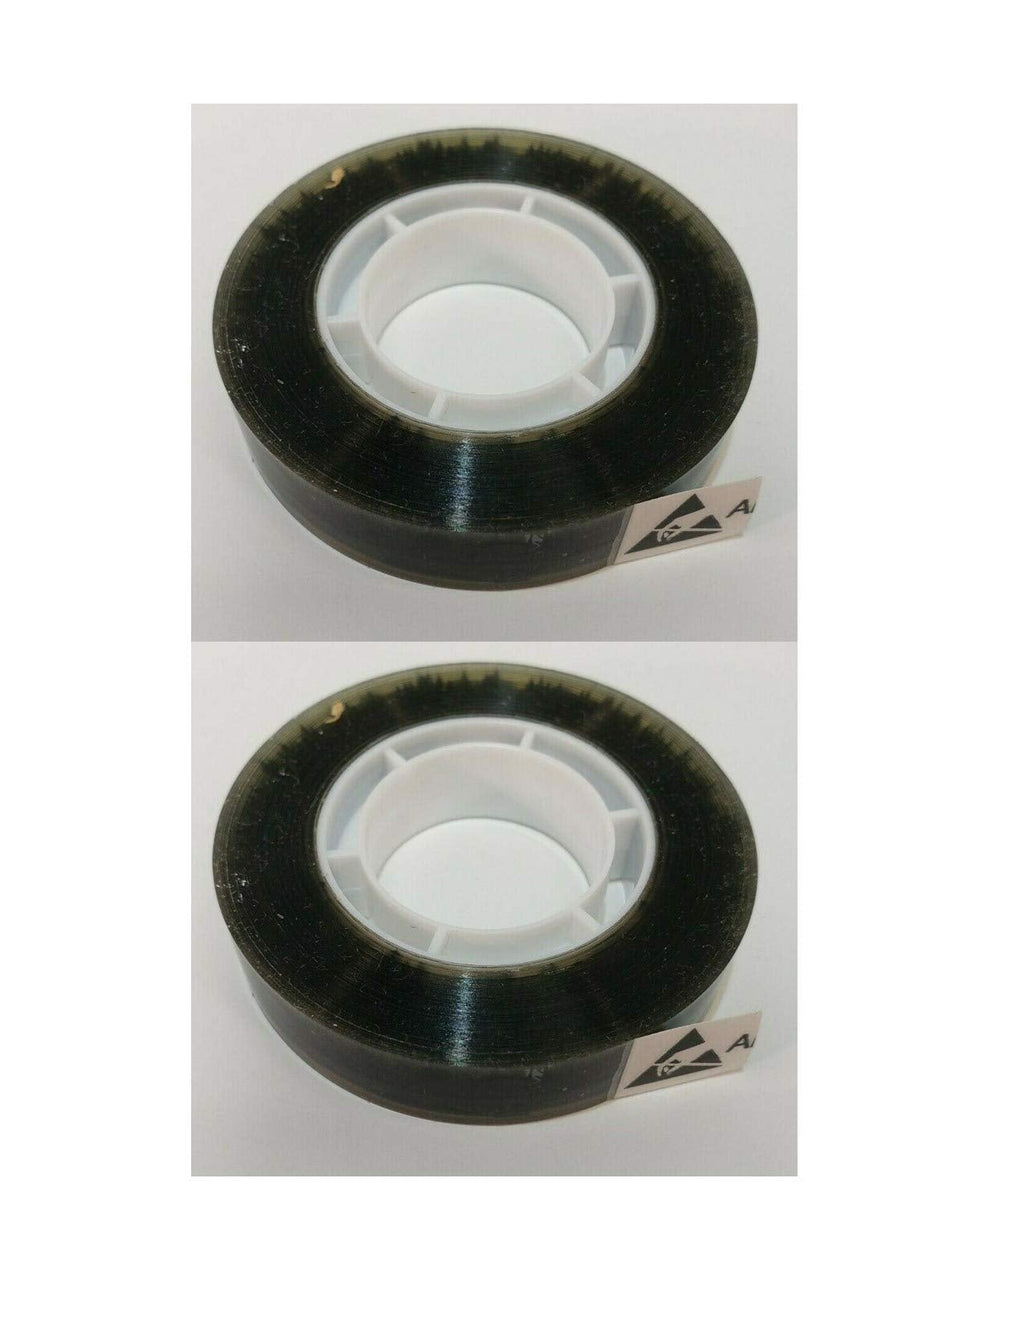  [AUSTRALIA] - B1651P ESD-Safe Tape with ESD and Anti-Stati Symbols, 1/2 inch x 36 Yards (1 inch Core) -2 Pack